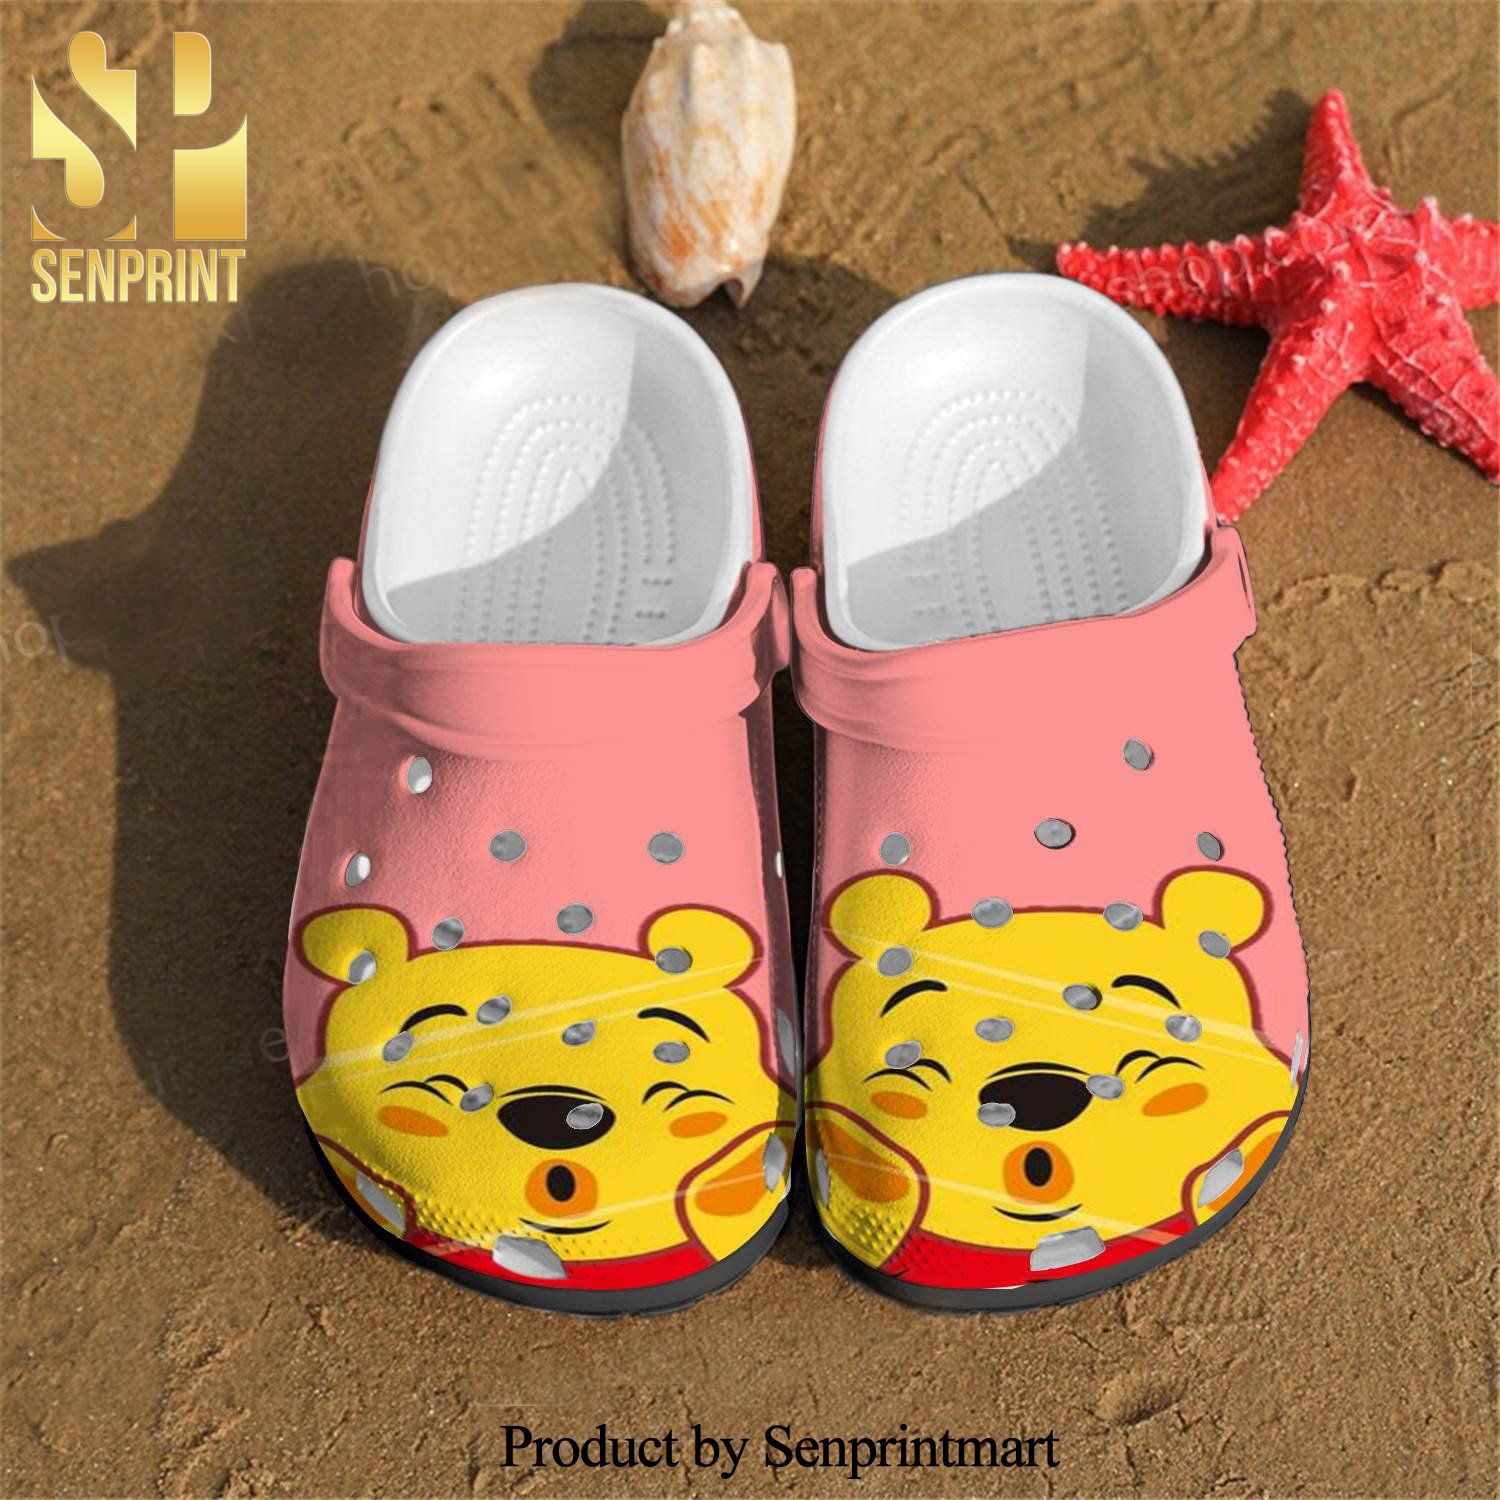 The Pooh Bear Gift For Fan Classic Water Full Printing Unisex Crocs Crocband Clog